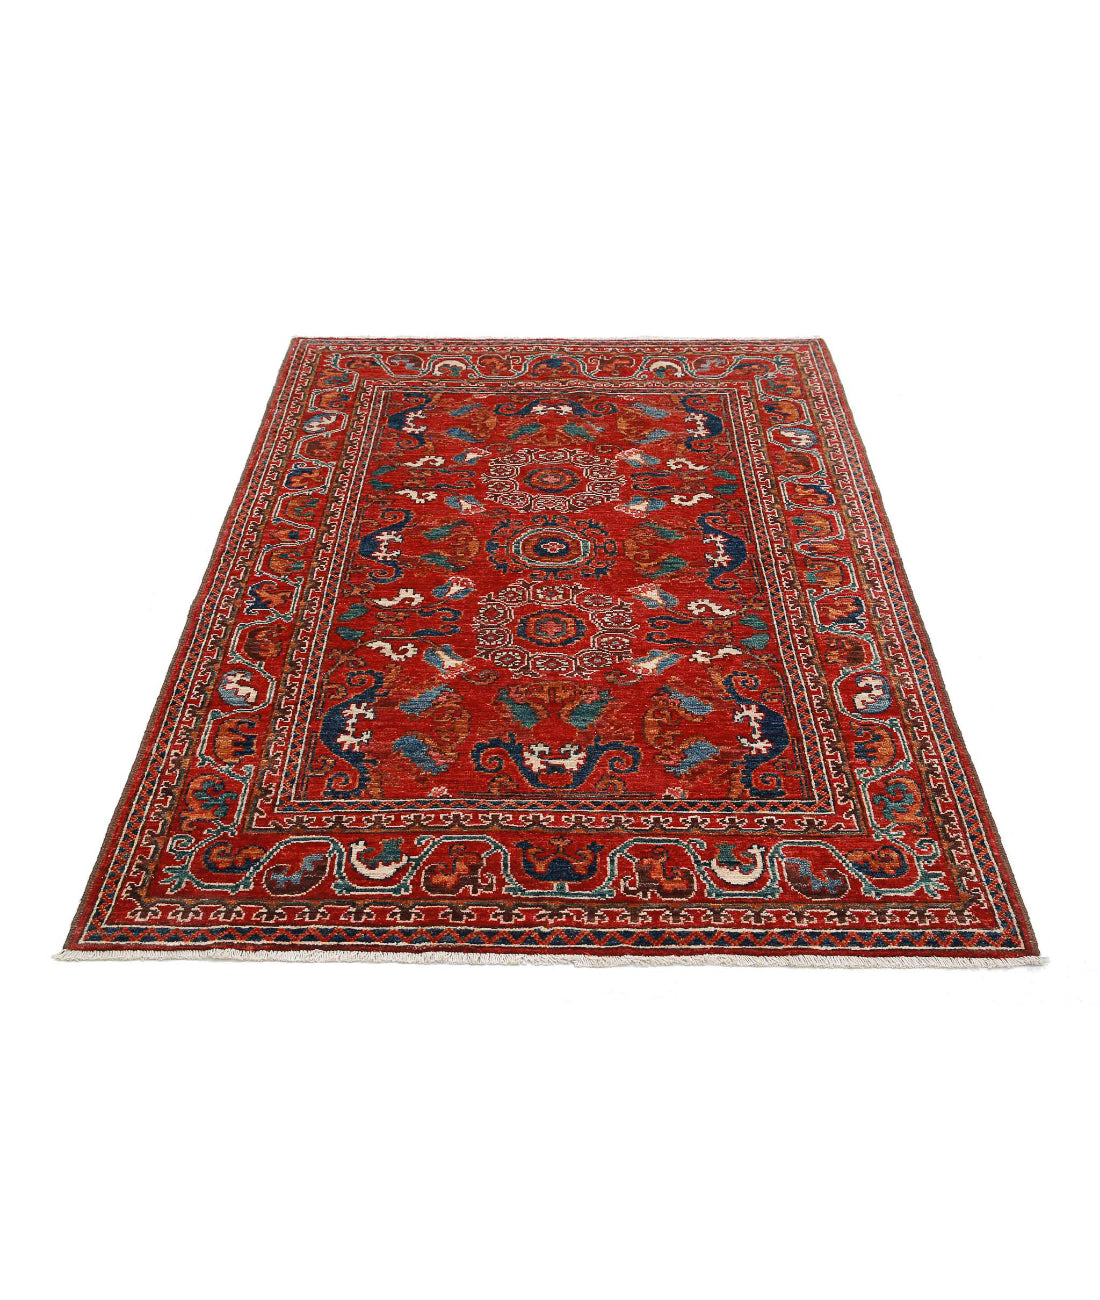 Hand Knotted Nomadic Caucasian Humna Wool Rug - 4'1'' x 5'10'' 4'1'' x 5'10'' (123 X 175) / Red / N/A